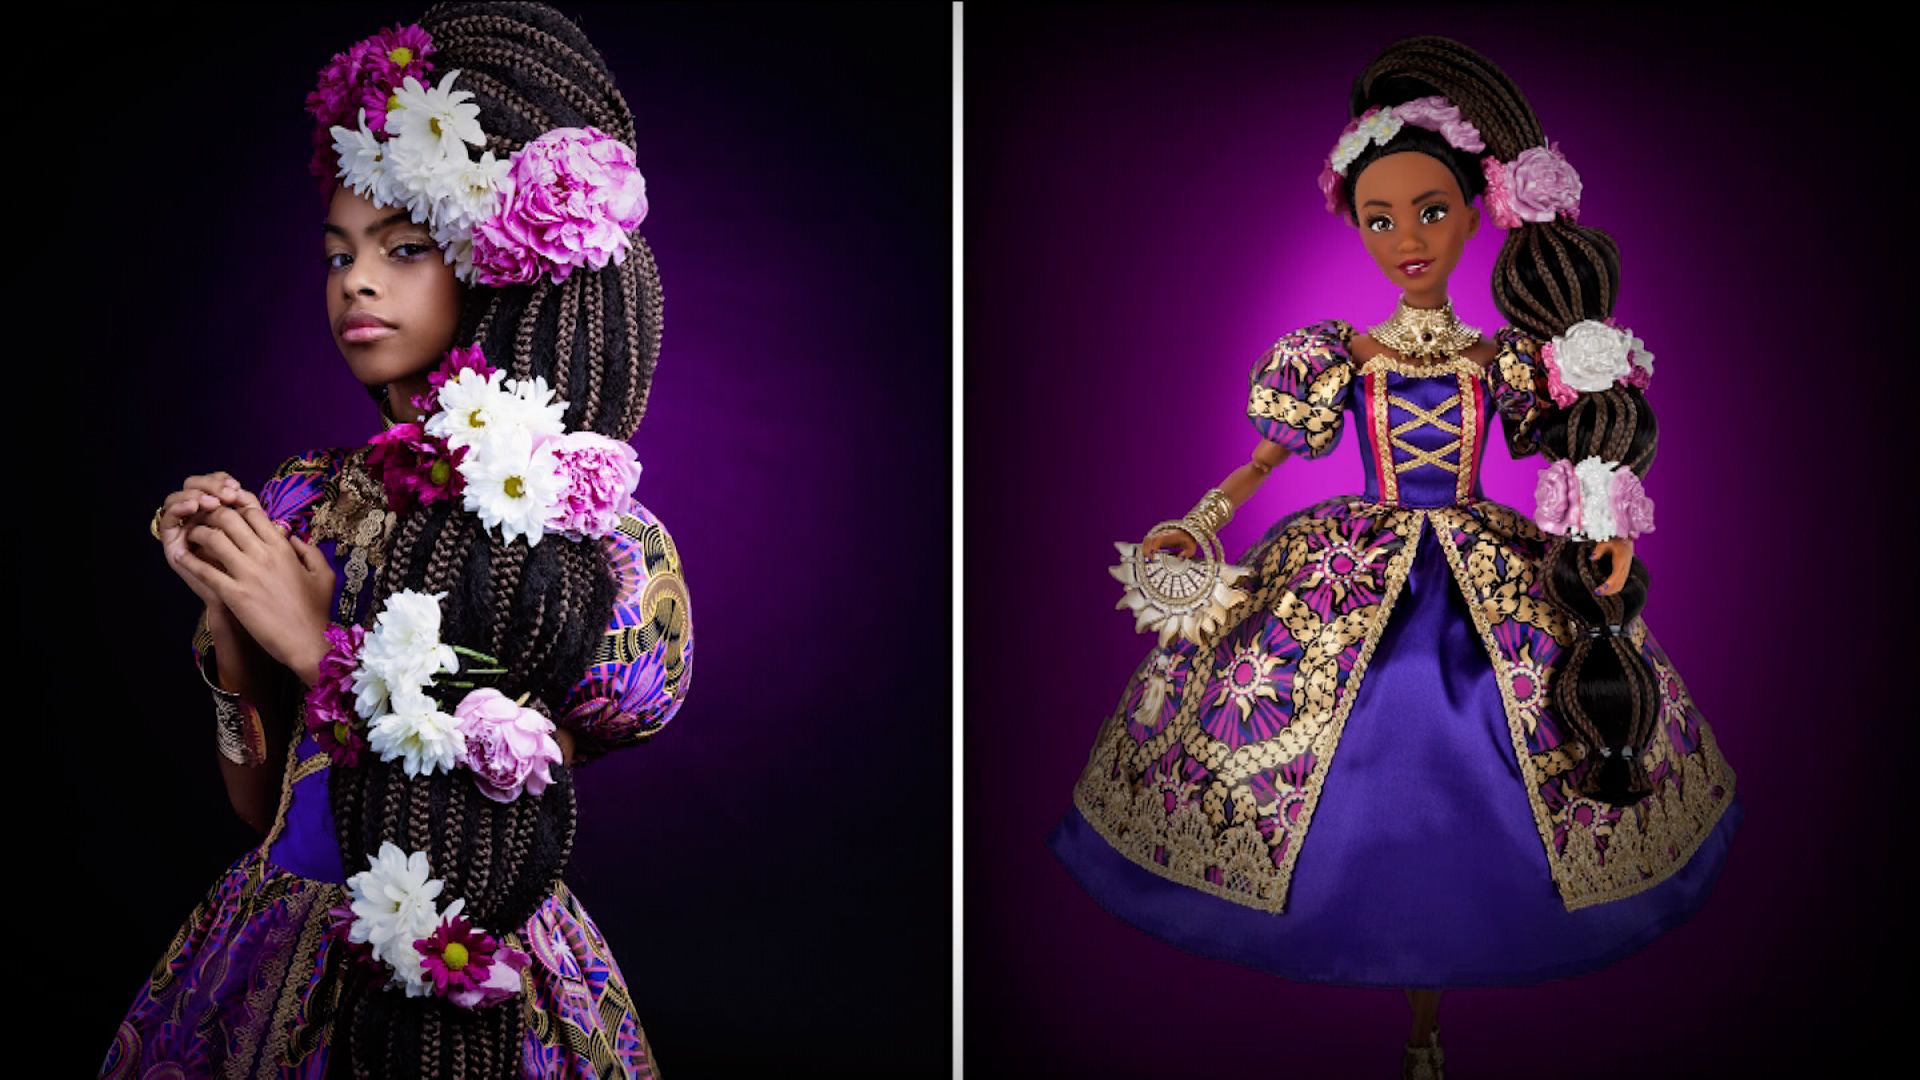 Meet the Most Diverse Disney Princess Dolls That Our Kids Can't